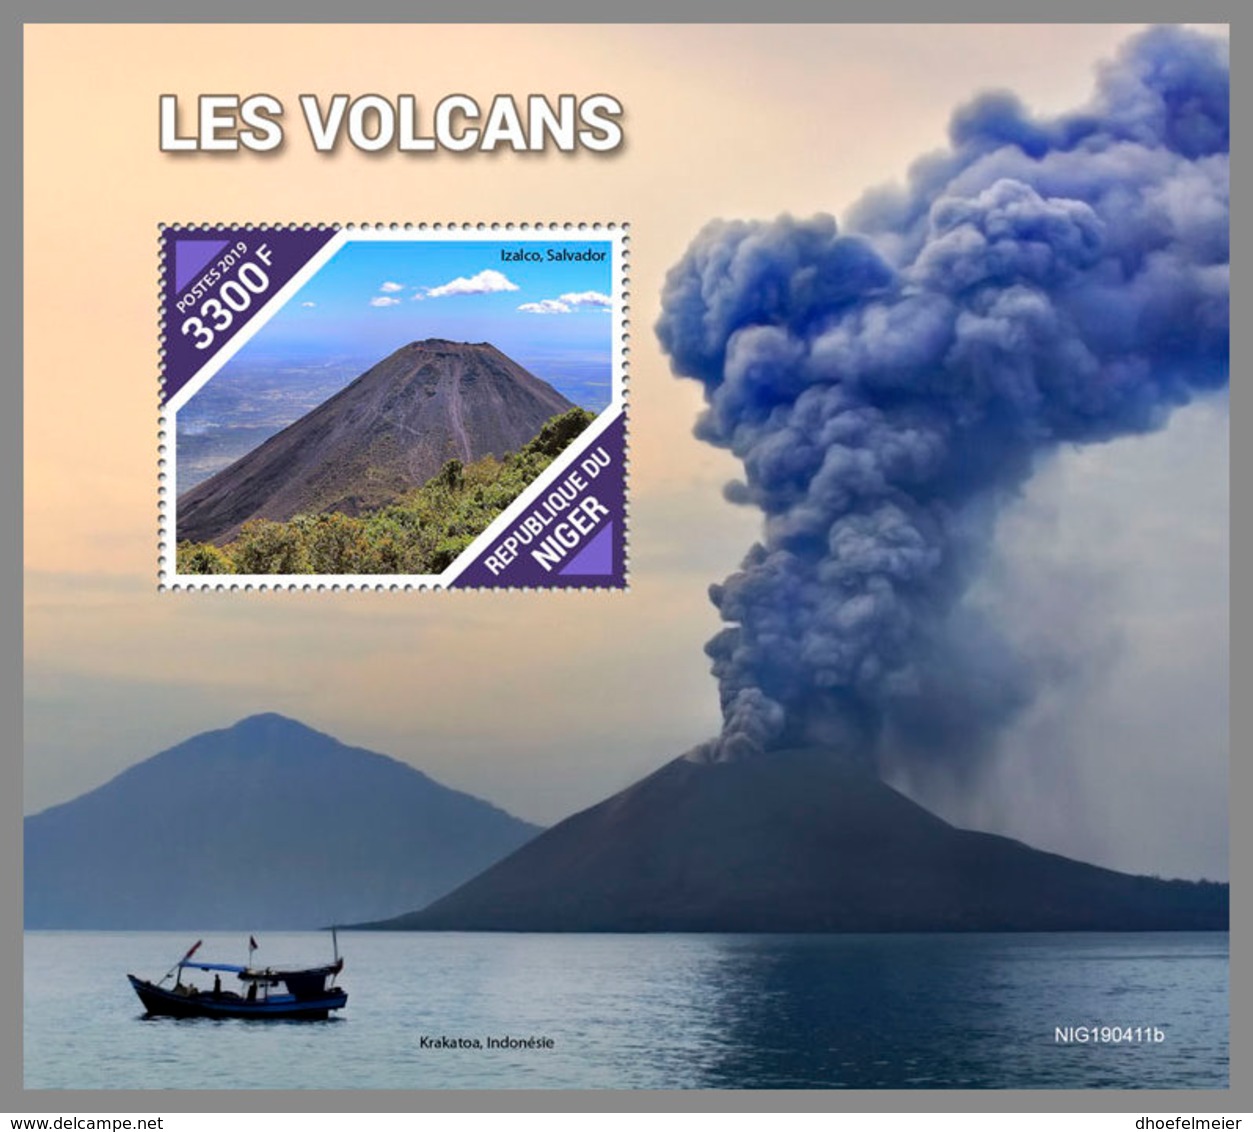 NIGER 2019 MNH Volcanoes Vilkane Volcans S/S - OFFICIAL ISSUE - DH1939 - Volcans